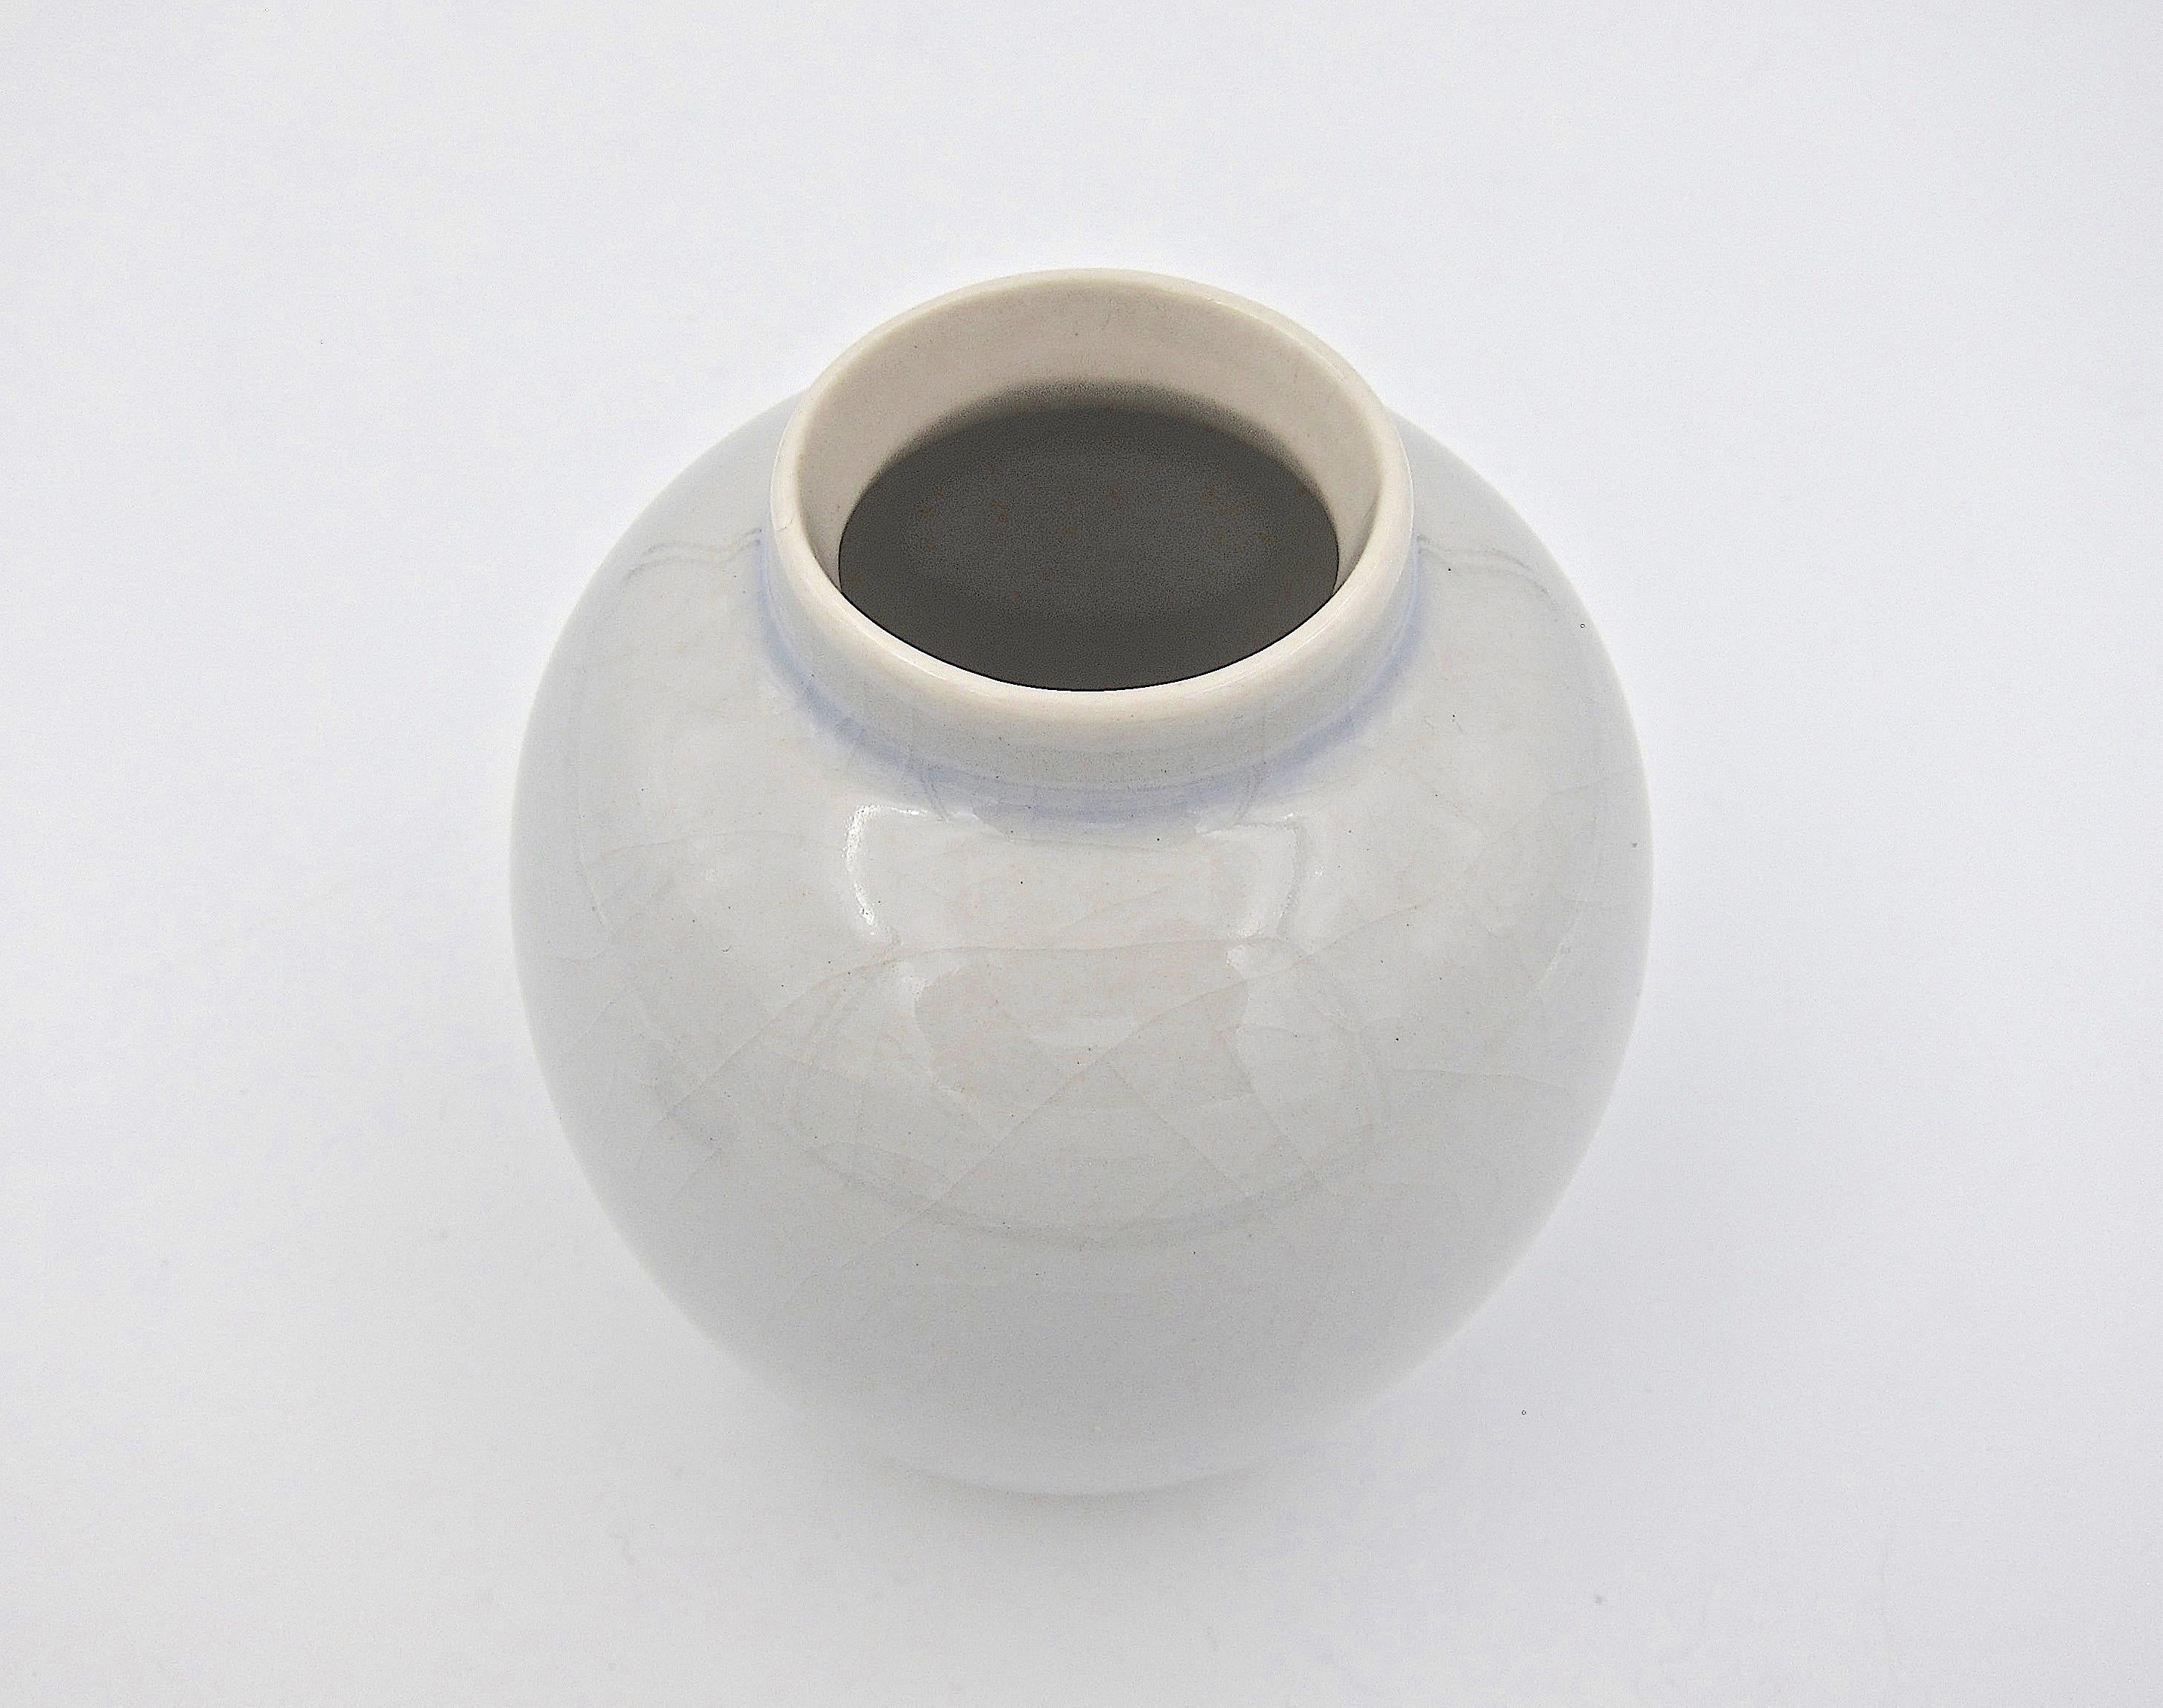 American Porcelain Ginger Jar with Craquelure Glaze by Rodney Rouse 1